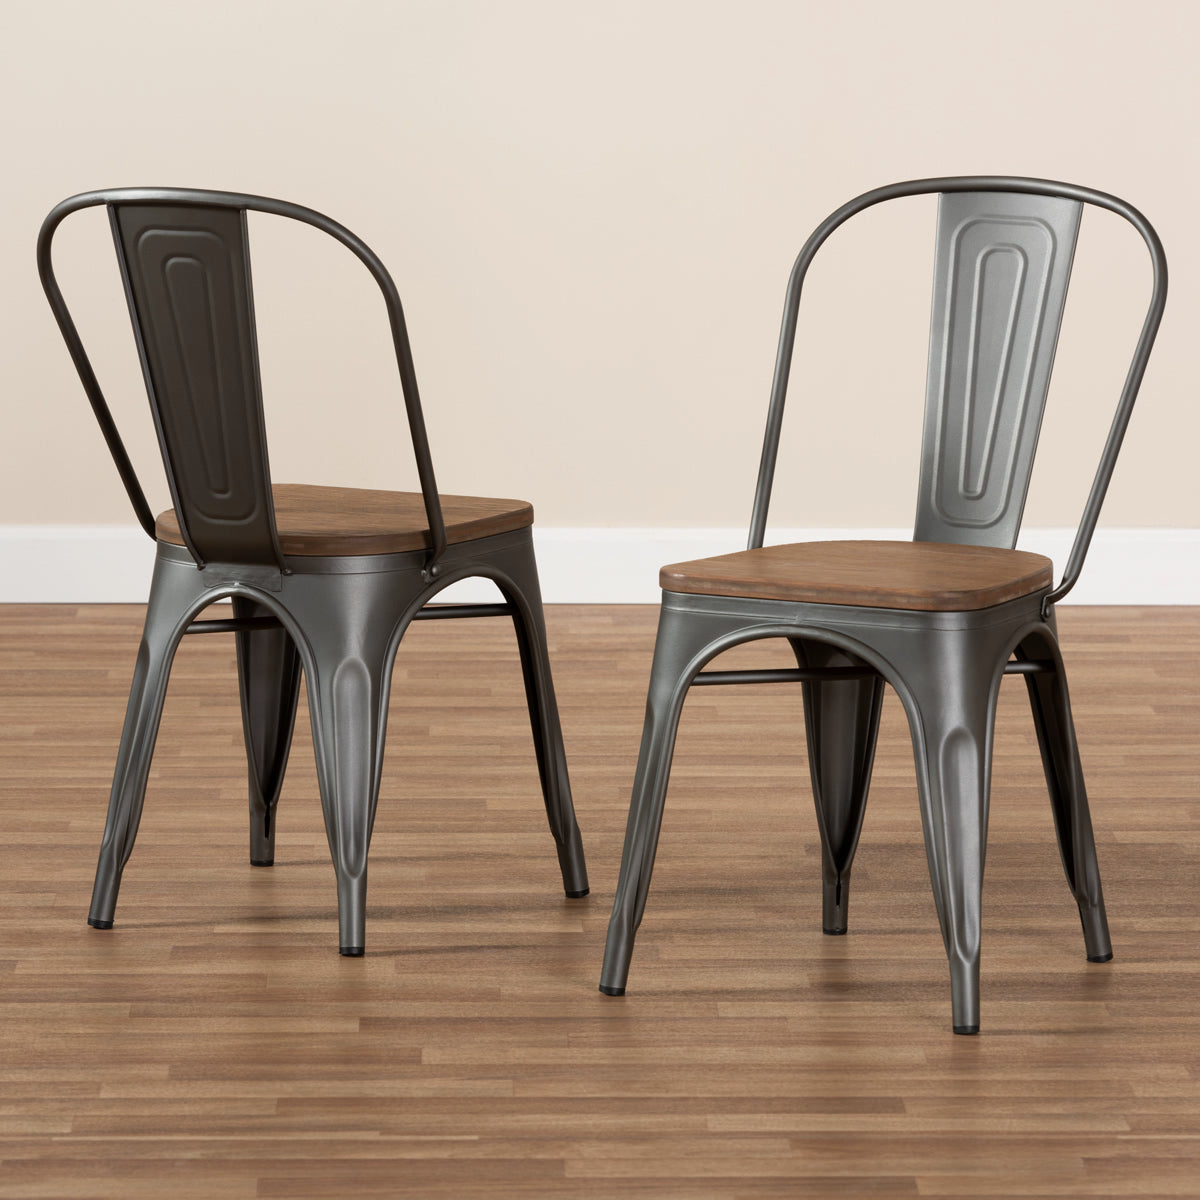 Baxton Studio Henri Vintage Rustic Industrial Style Tolix-Inspired Bamboo and Gun Metal-Finished Steel Stackable Dining Chair Set of 2 Baxton Studio-dining chair-Minimal And Modern - 7